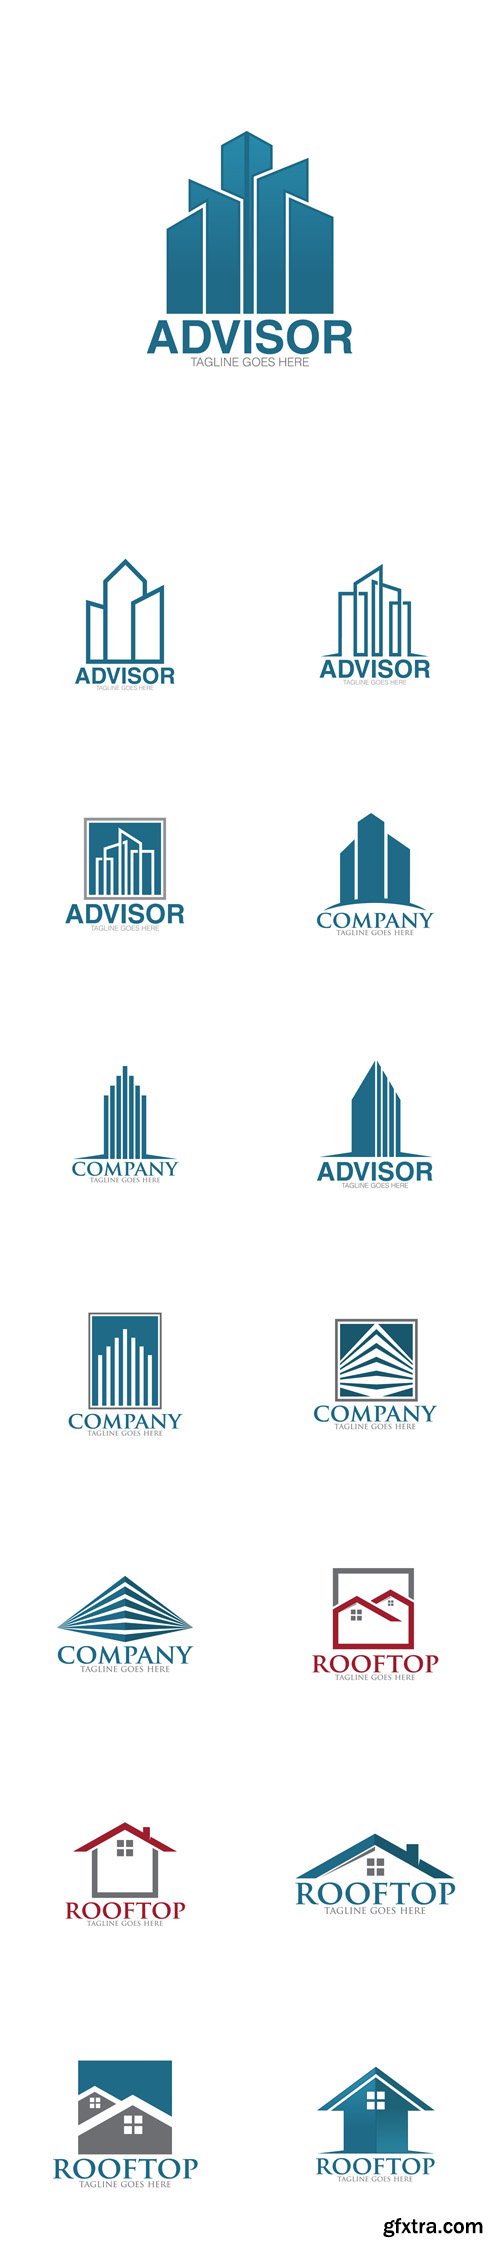 Vector Set - Building Advisor and Home Roof Top Logos